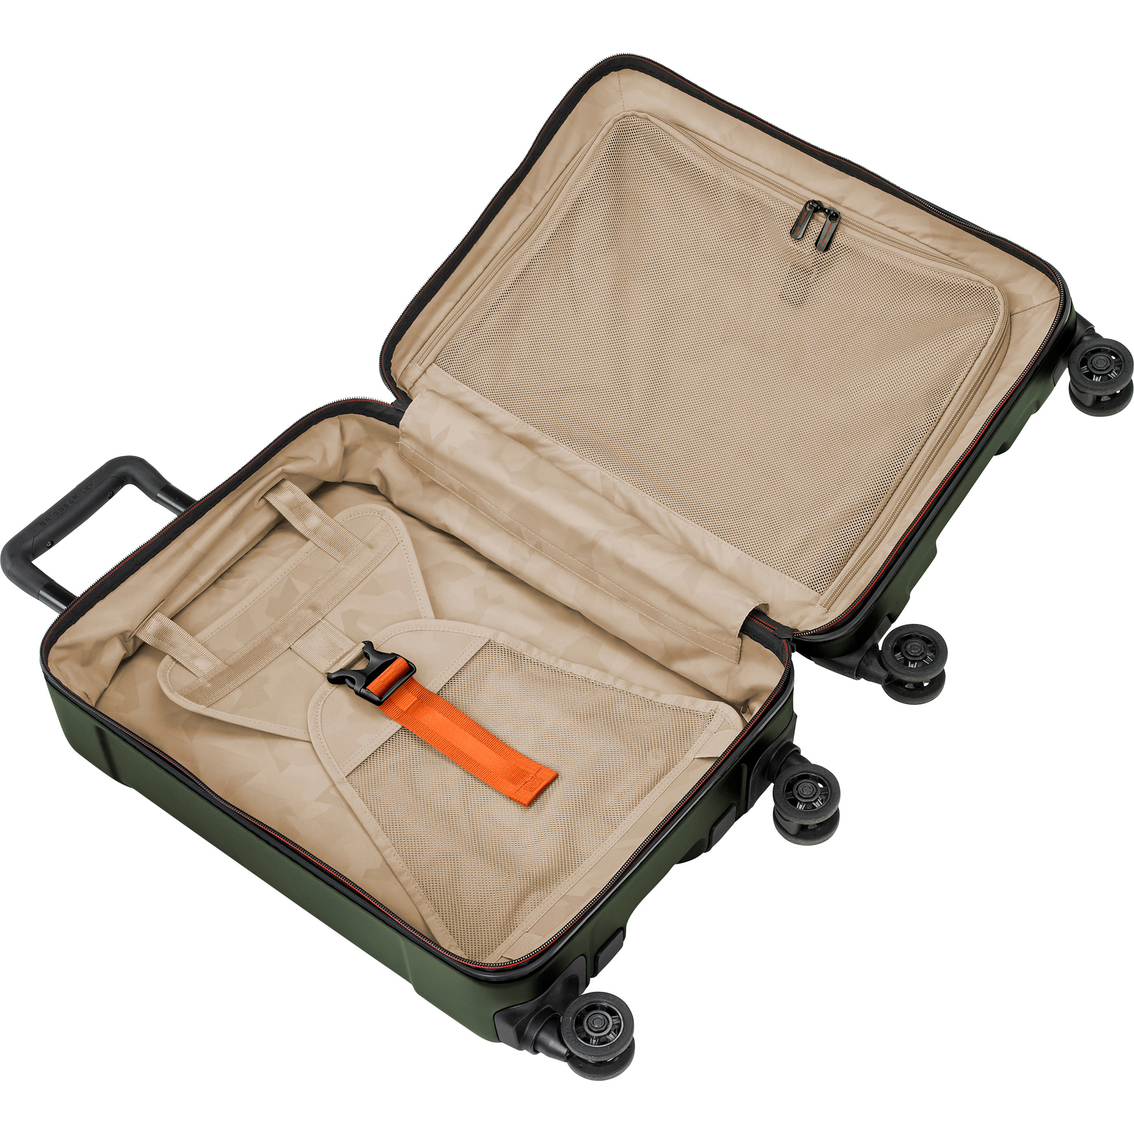 Briggs & Riley Torq 21 in. International Carry-On Spinner - Image 9 of 10